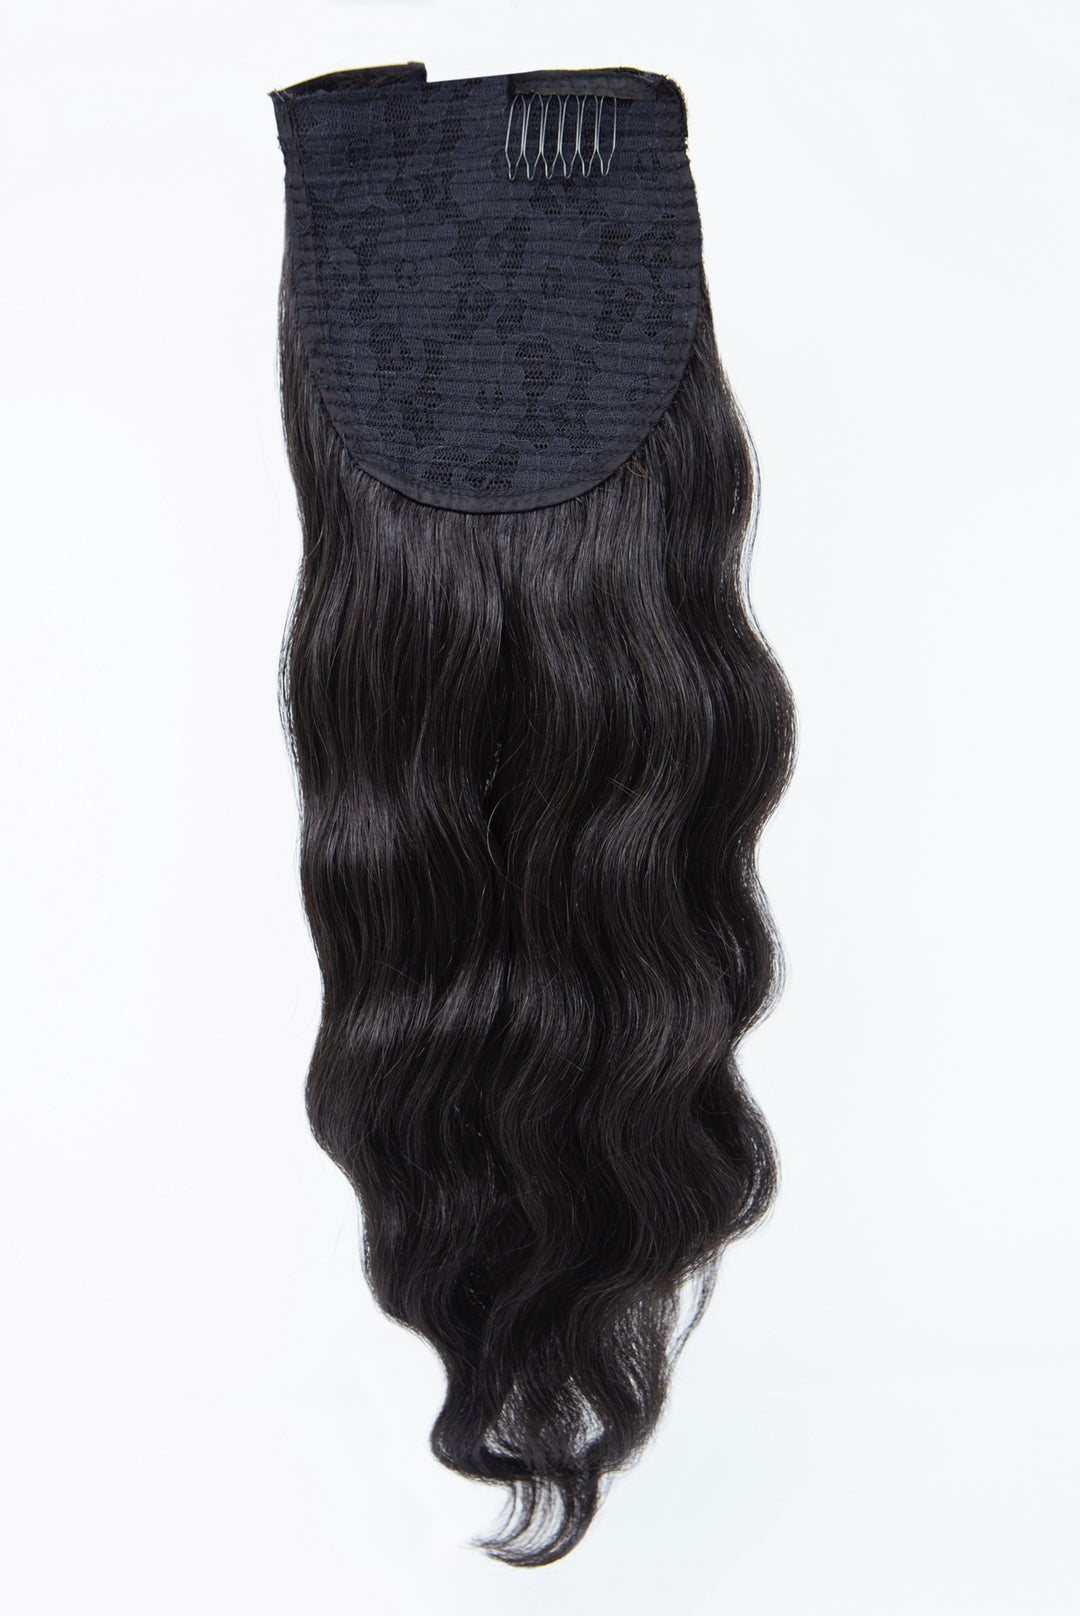 WAVY INSTANT PONYTAIL (defective comb or strap)